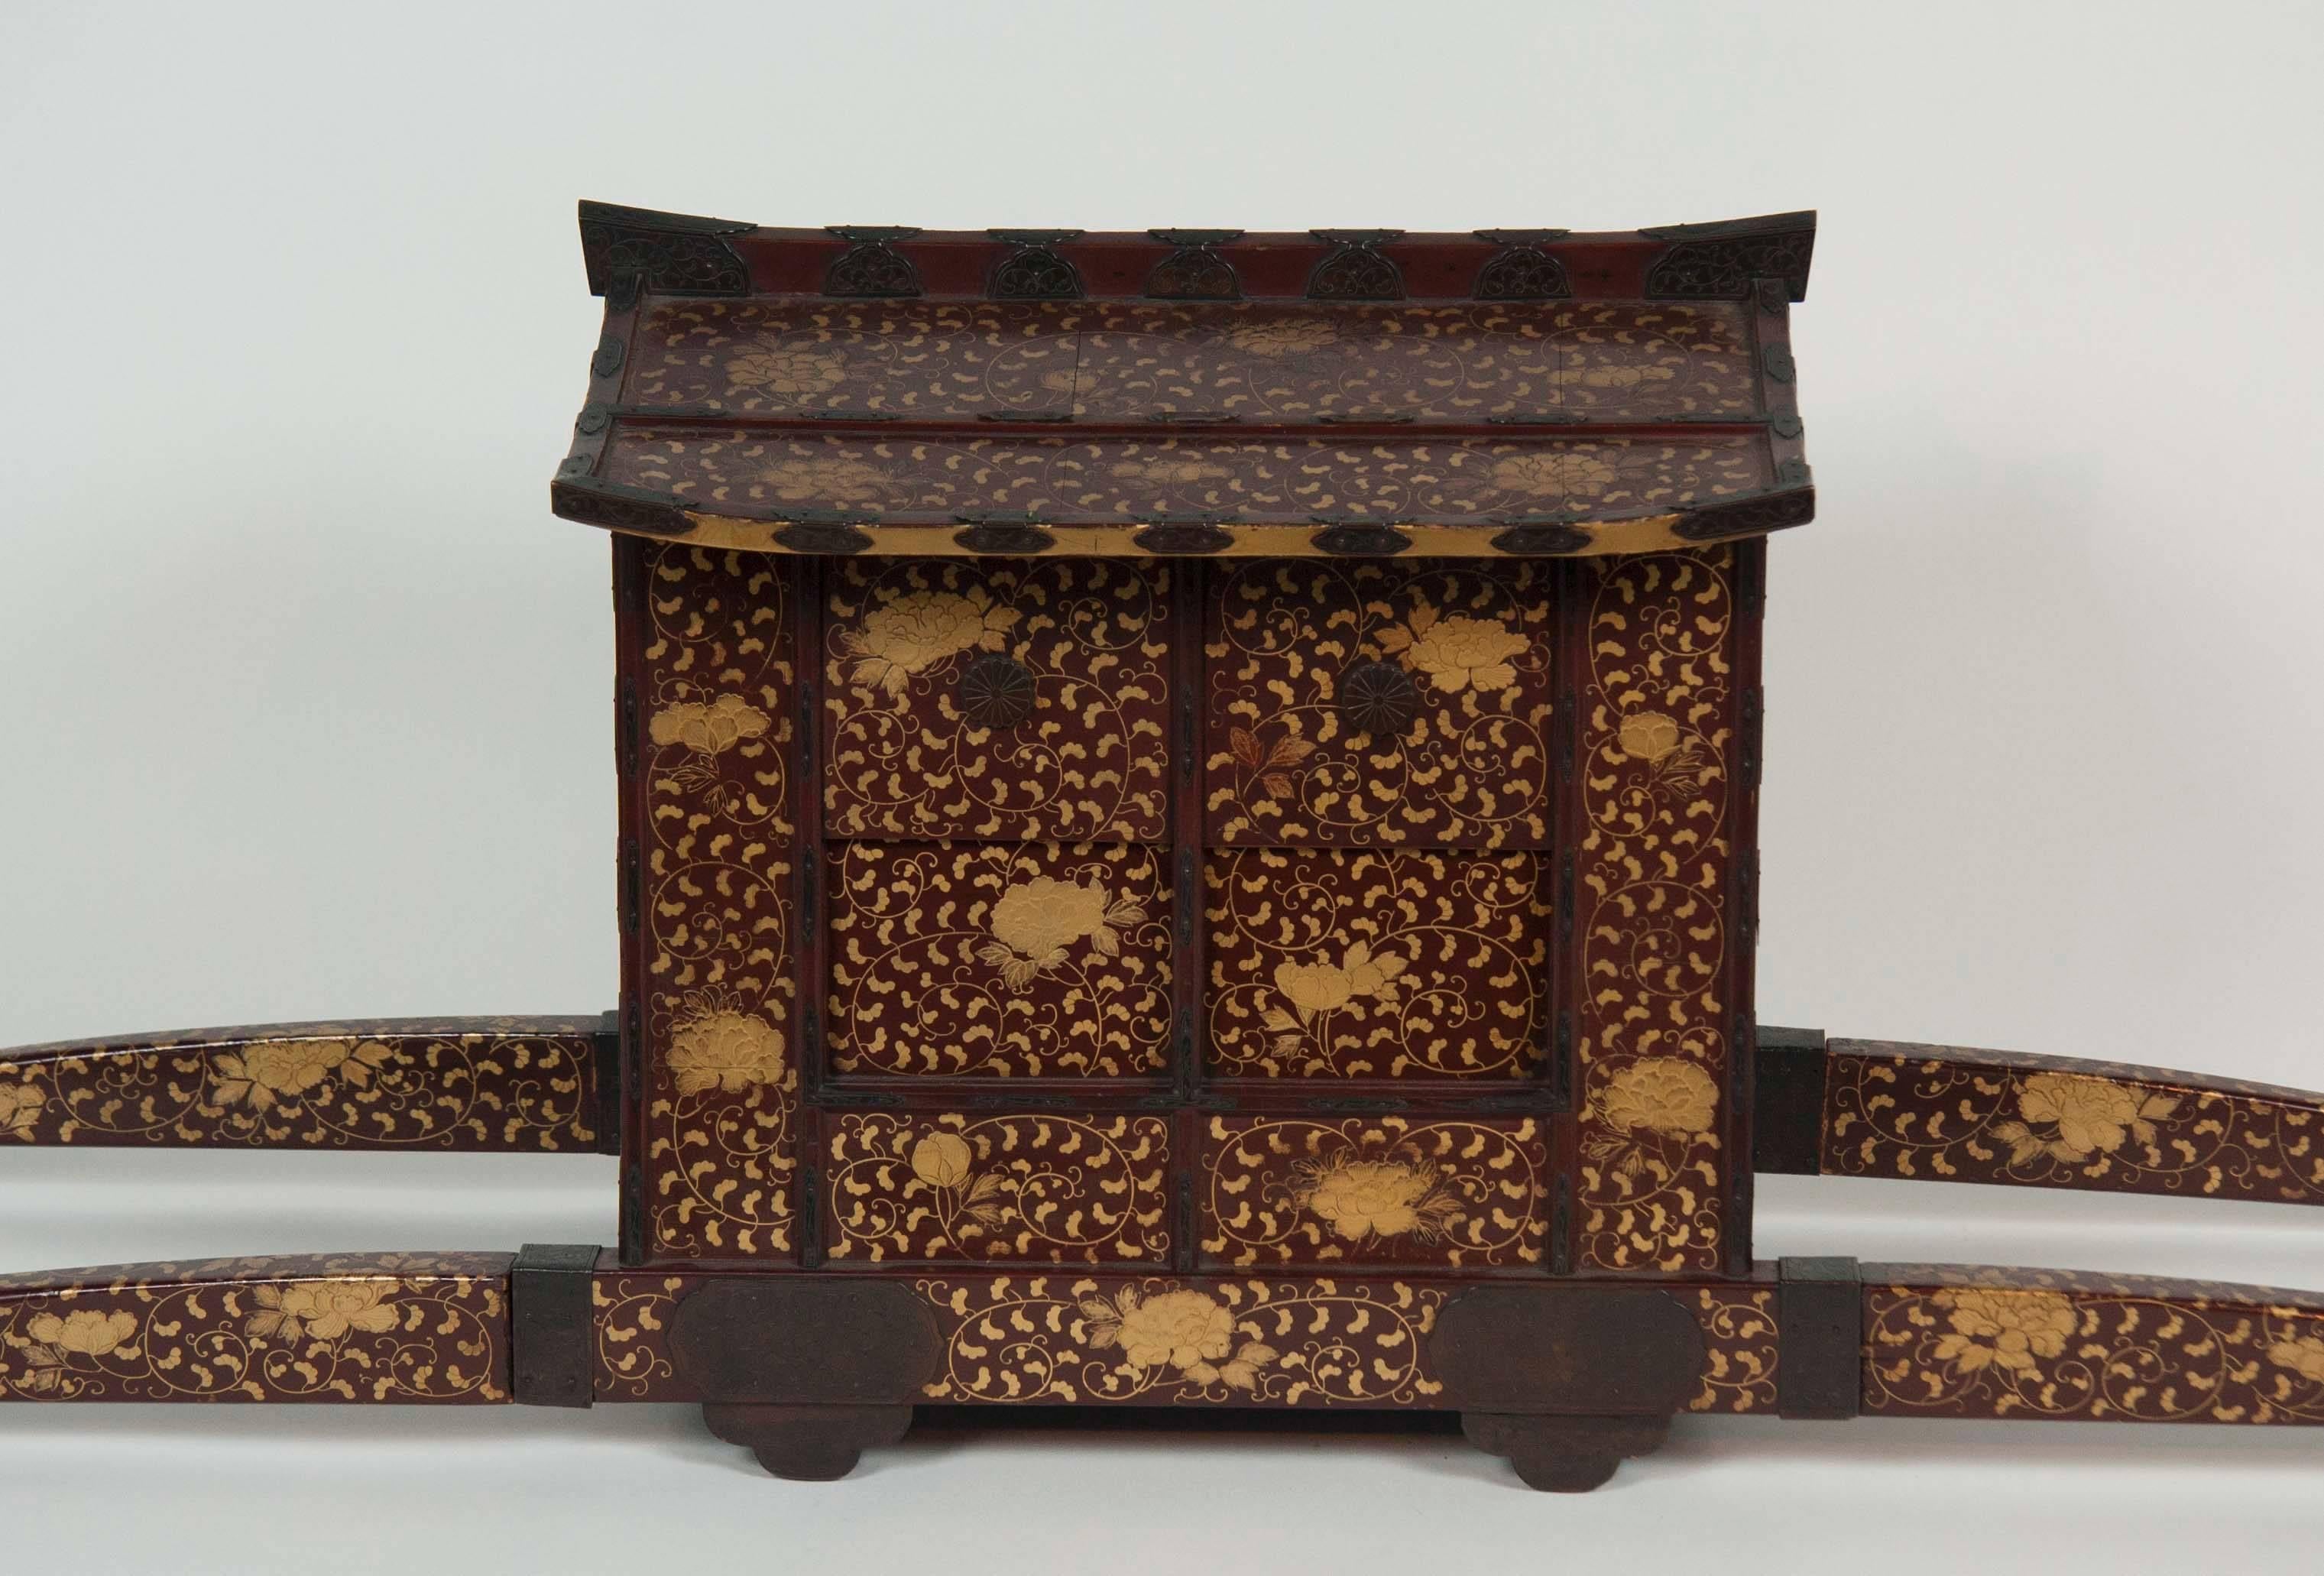 A Japanese Edo-Meiji period Palanquin chair for the childrens festival. The form with sliding and hinged doors, decorated in gold hiramaki-e with peonies and scrolling foliage on a dark reddish-brown.